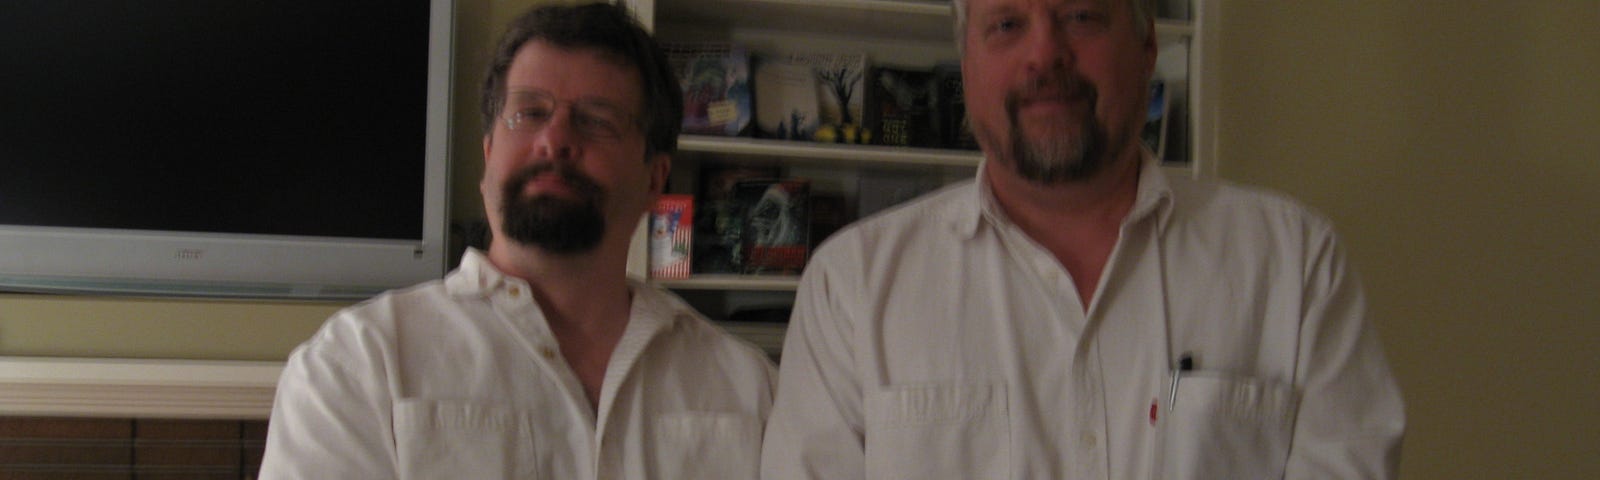 My brother Dan (he’s the tall one), and myself back in 2011.